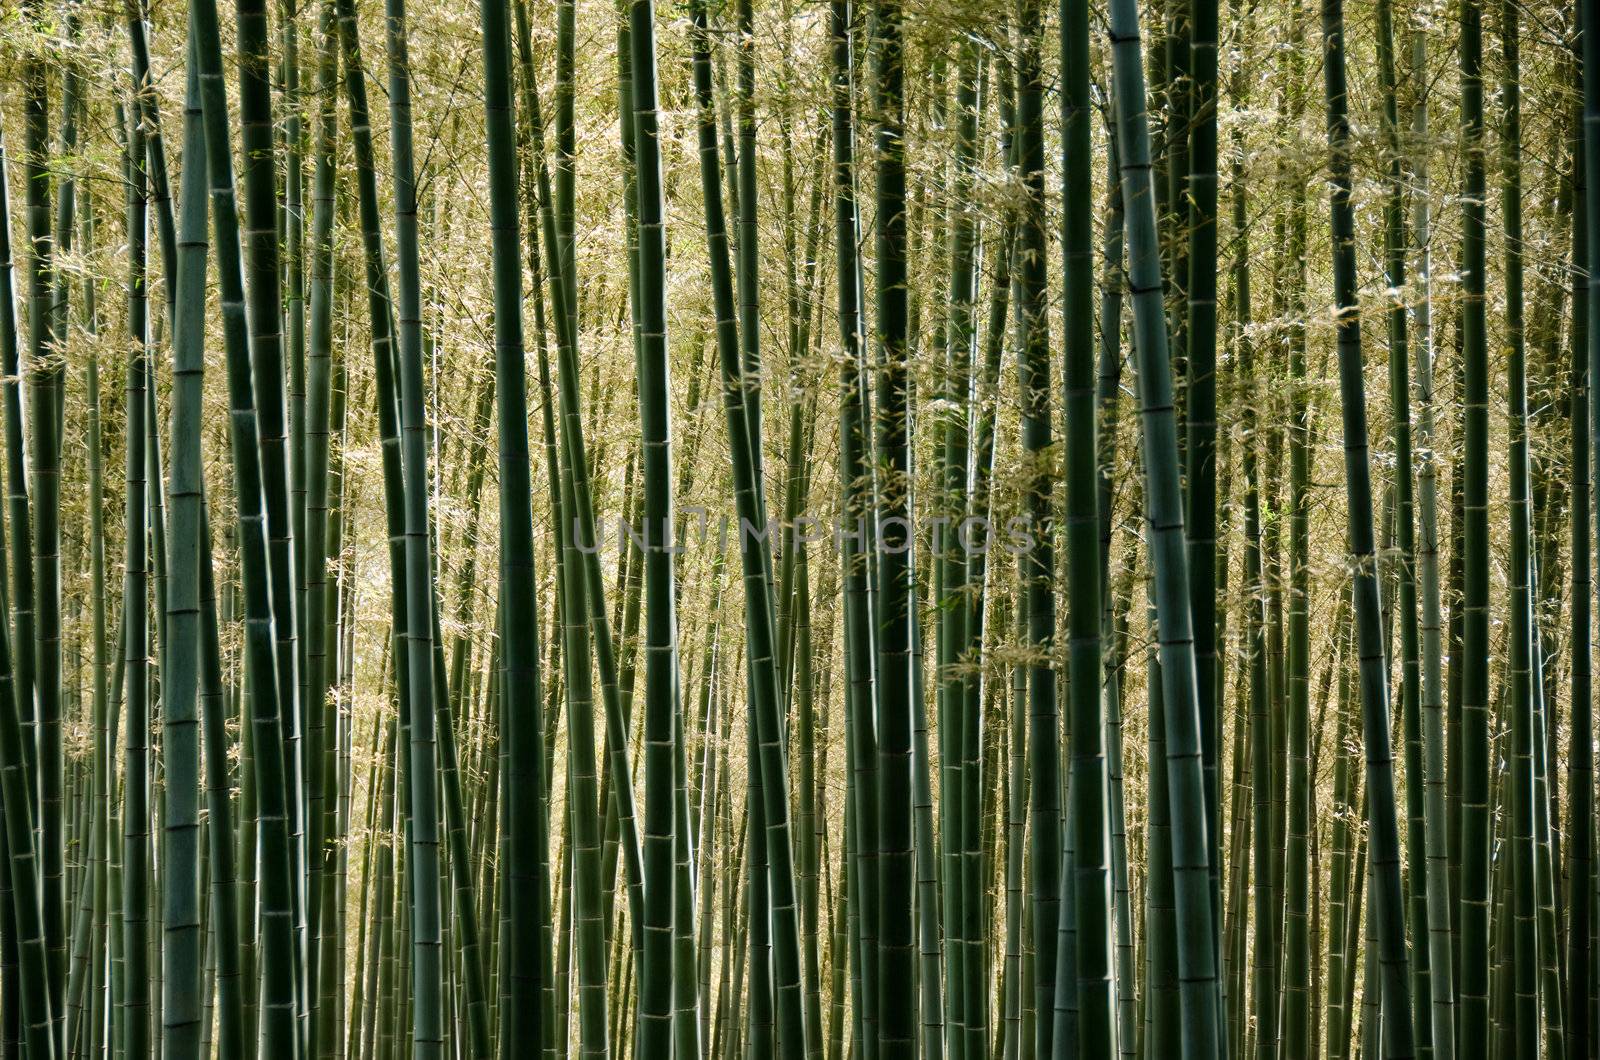 Bamboo forest by Arrxxx